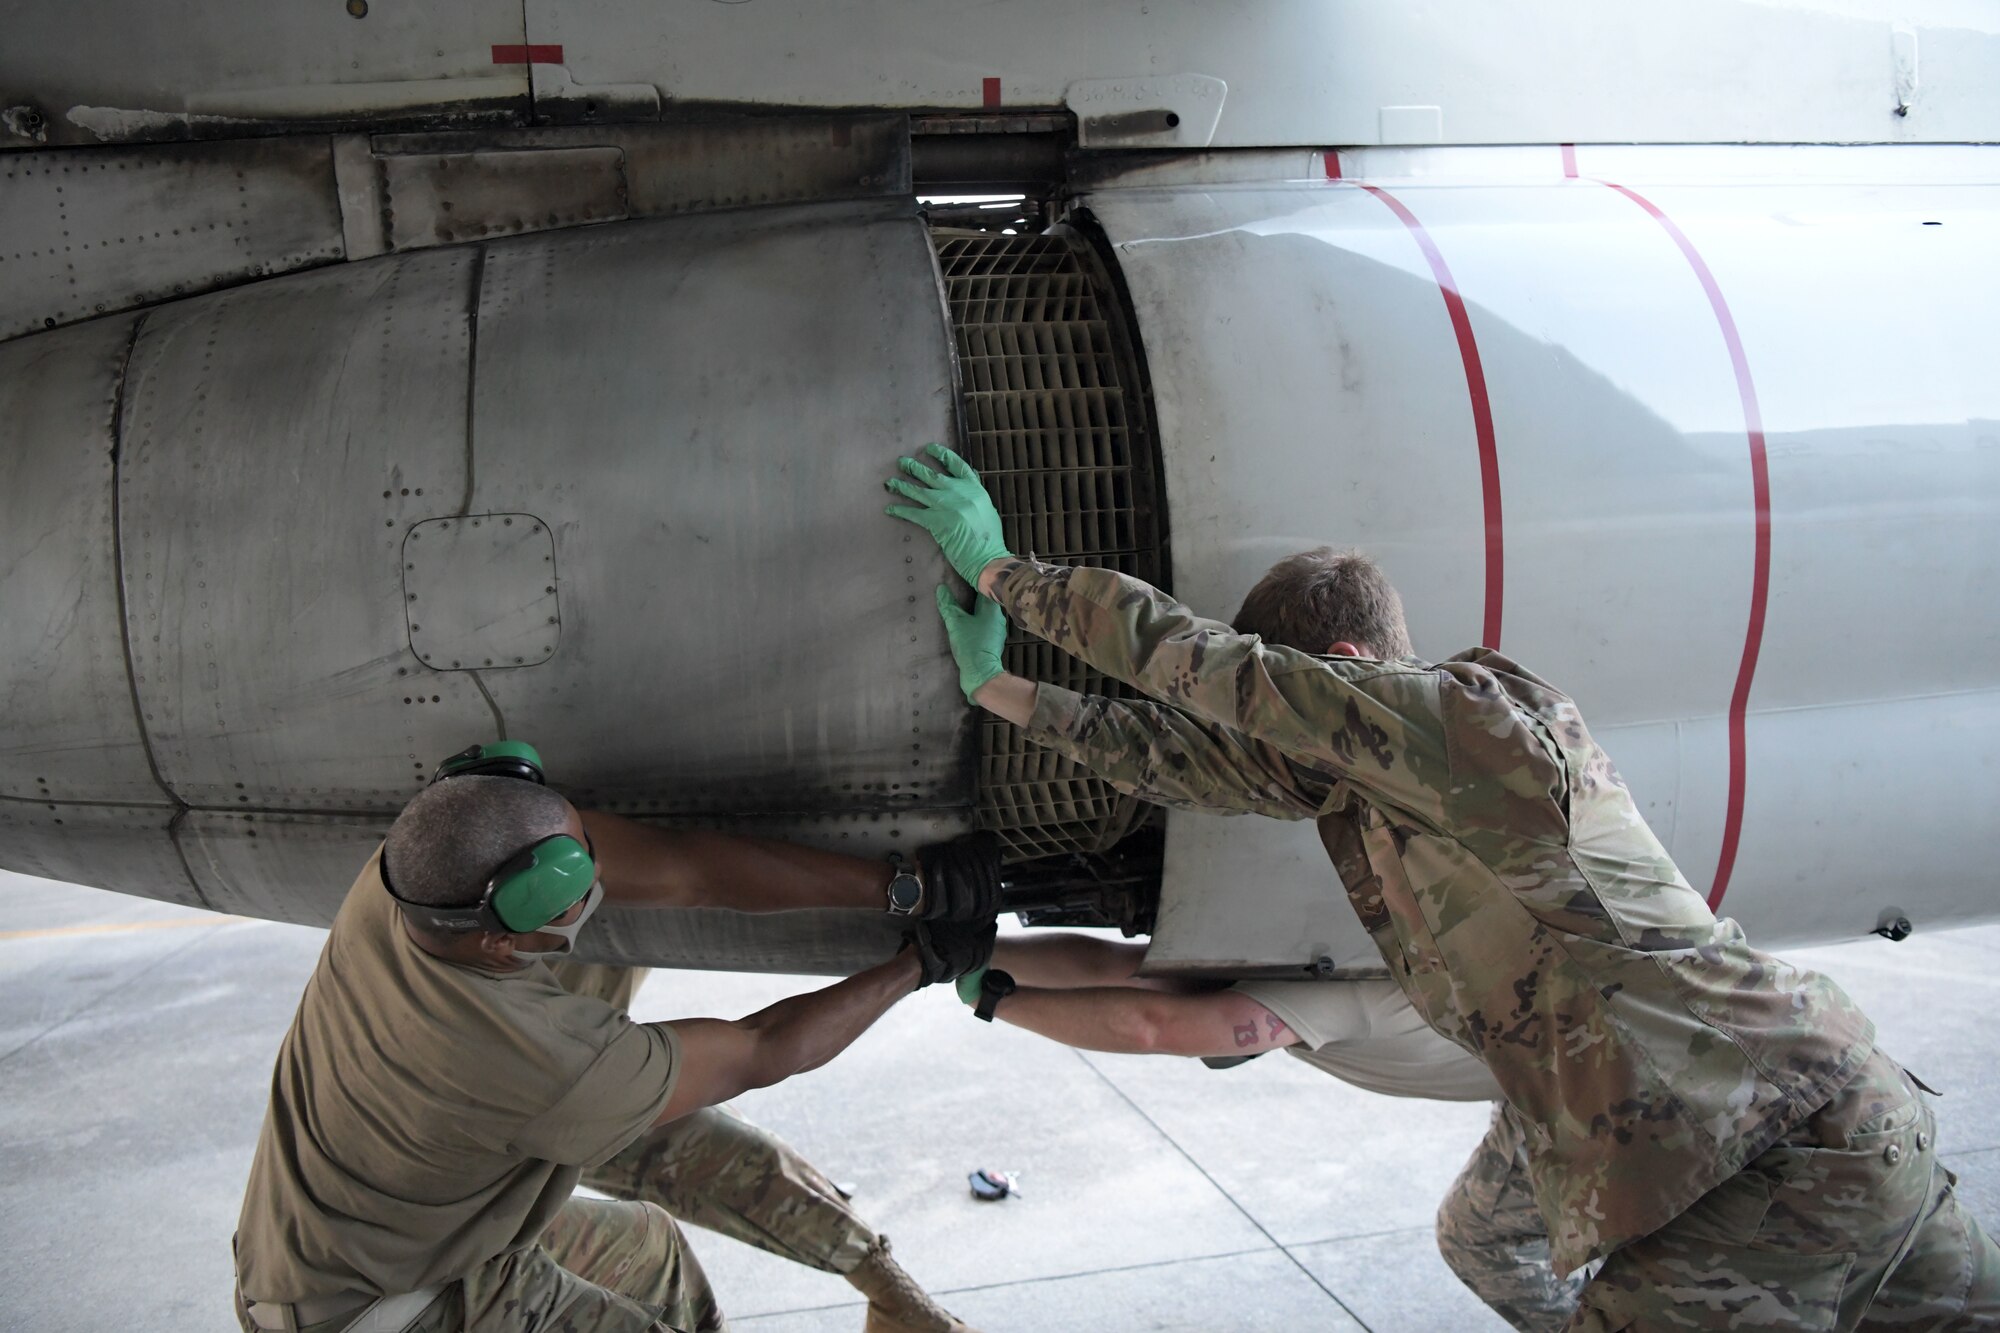 5th Expeditionary Airborne Command and Control Squadron Joint Surveillance Target Attack Radar System team members work together to remove outer engine components of an E-8C Joint STARS aircraft at Kadena Air Base, Japan, Sept. 24, 2020. The Air National Guard and active duty members from Robins Air Force Base, Georgia, are on three-month rotations to work with the 5th EACCS on KAB to promote total force integration and joint interoperability. (U.S. Air Force photo by Airman 1st Class Rebeckah Medeiros)